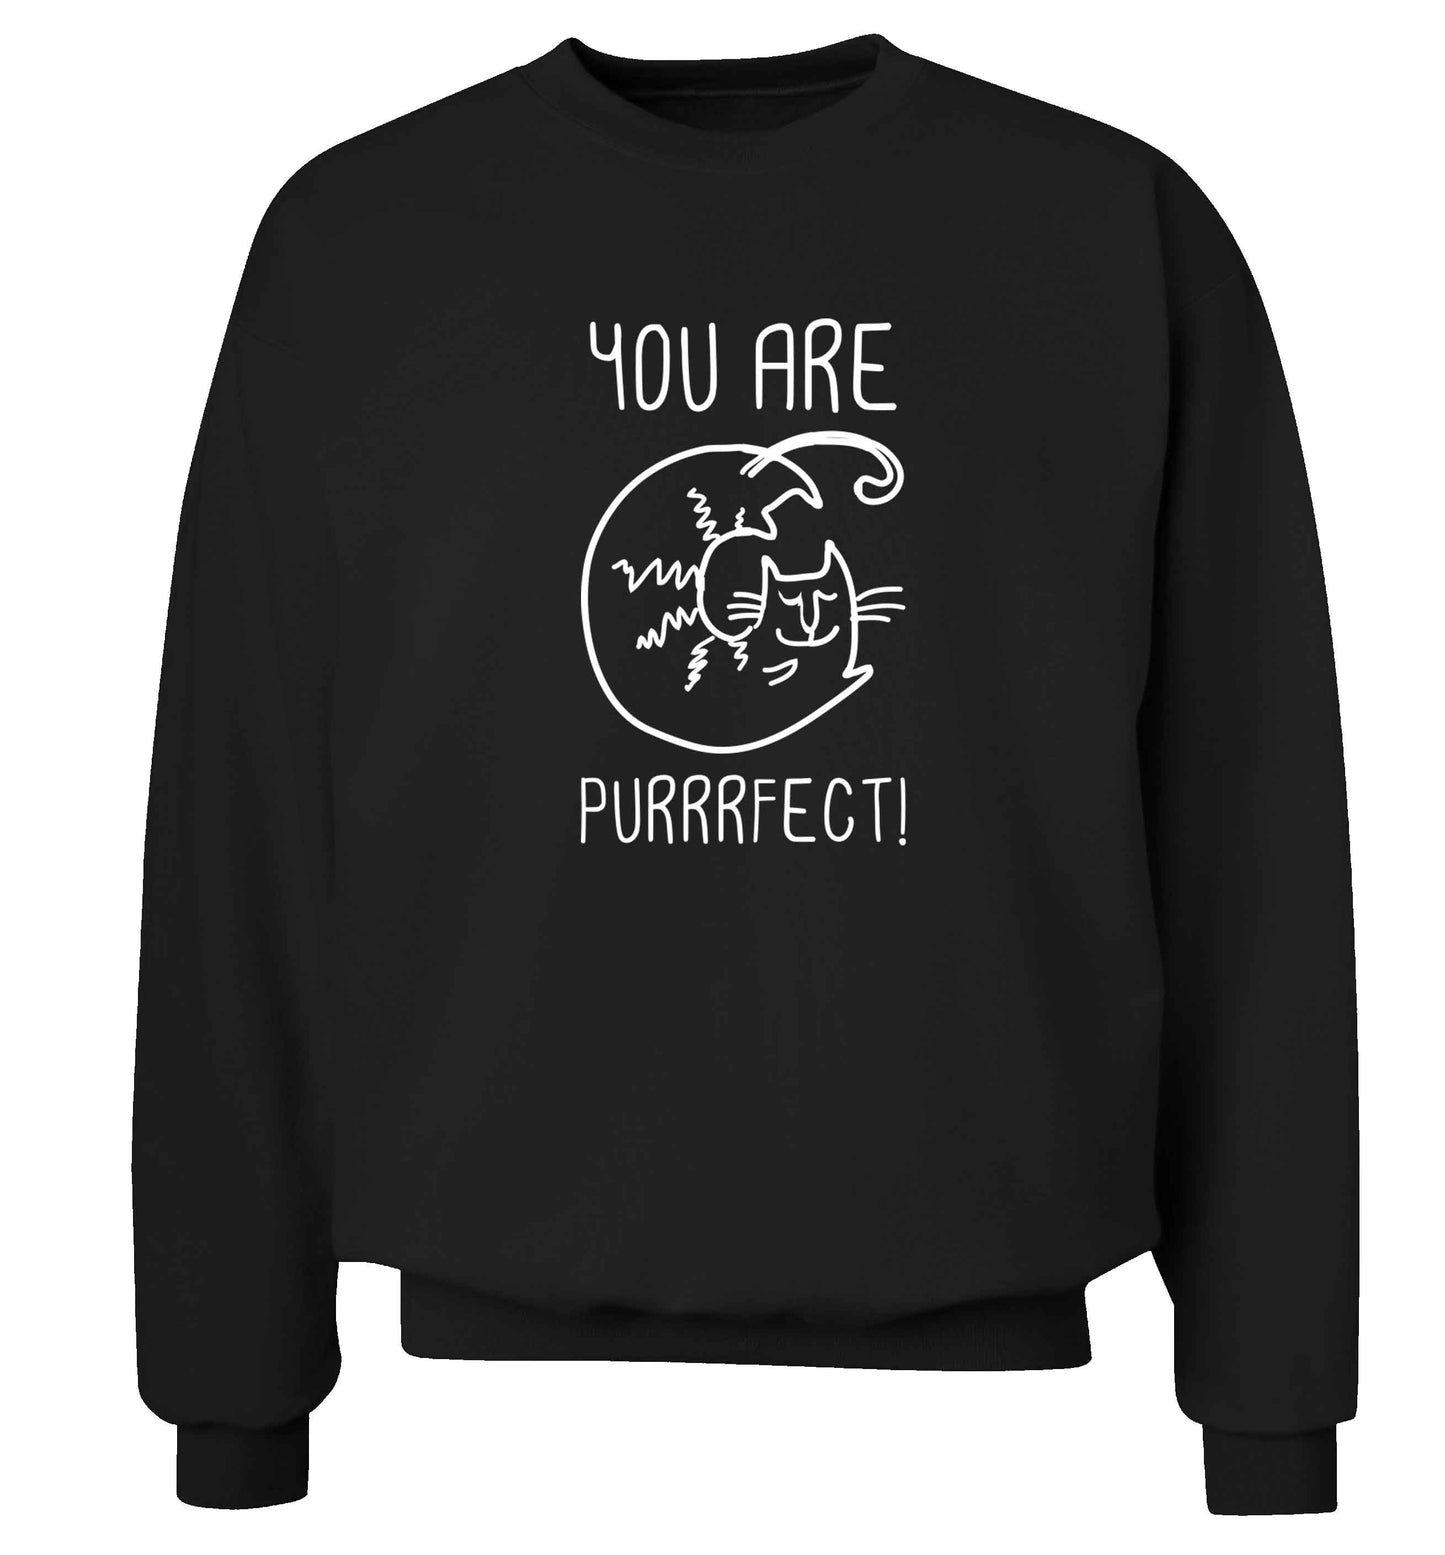 You are purrfect adult's unisex black sweater 2XL